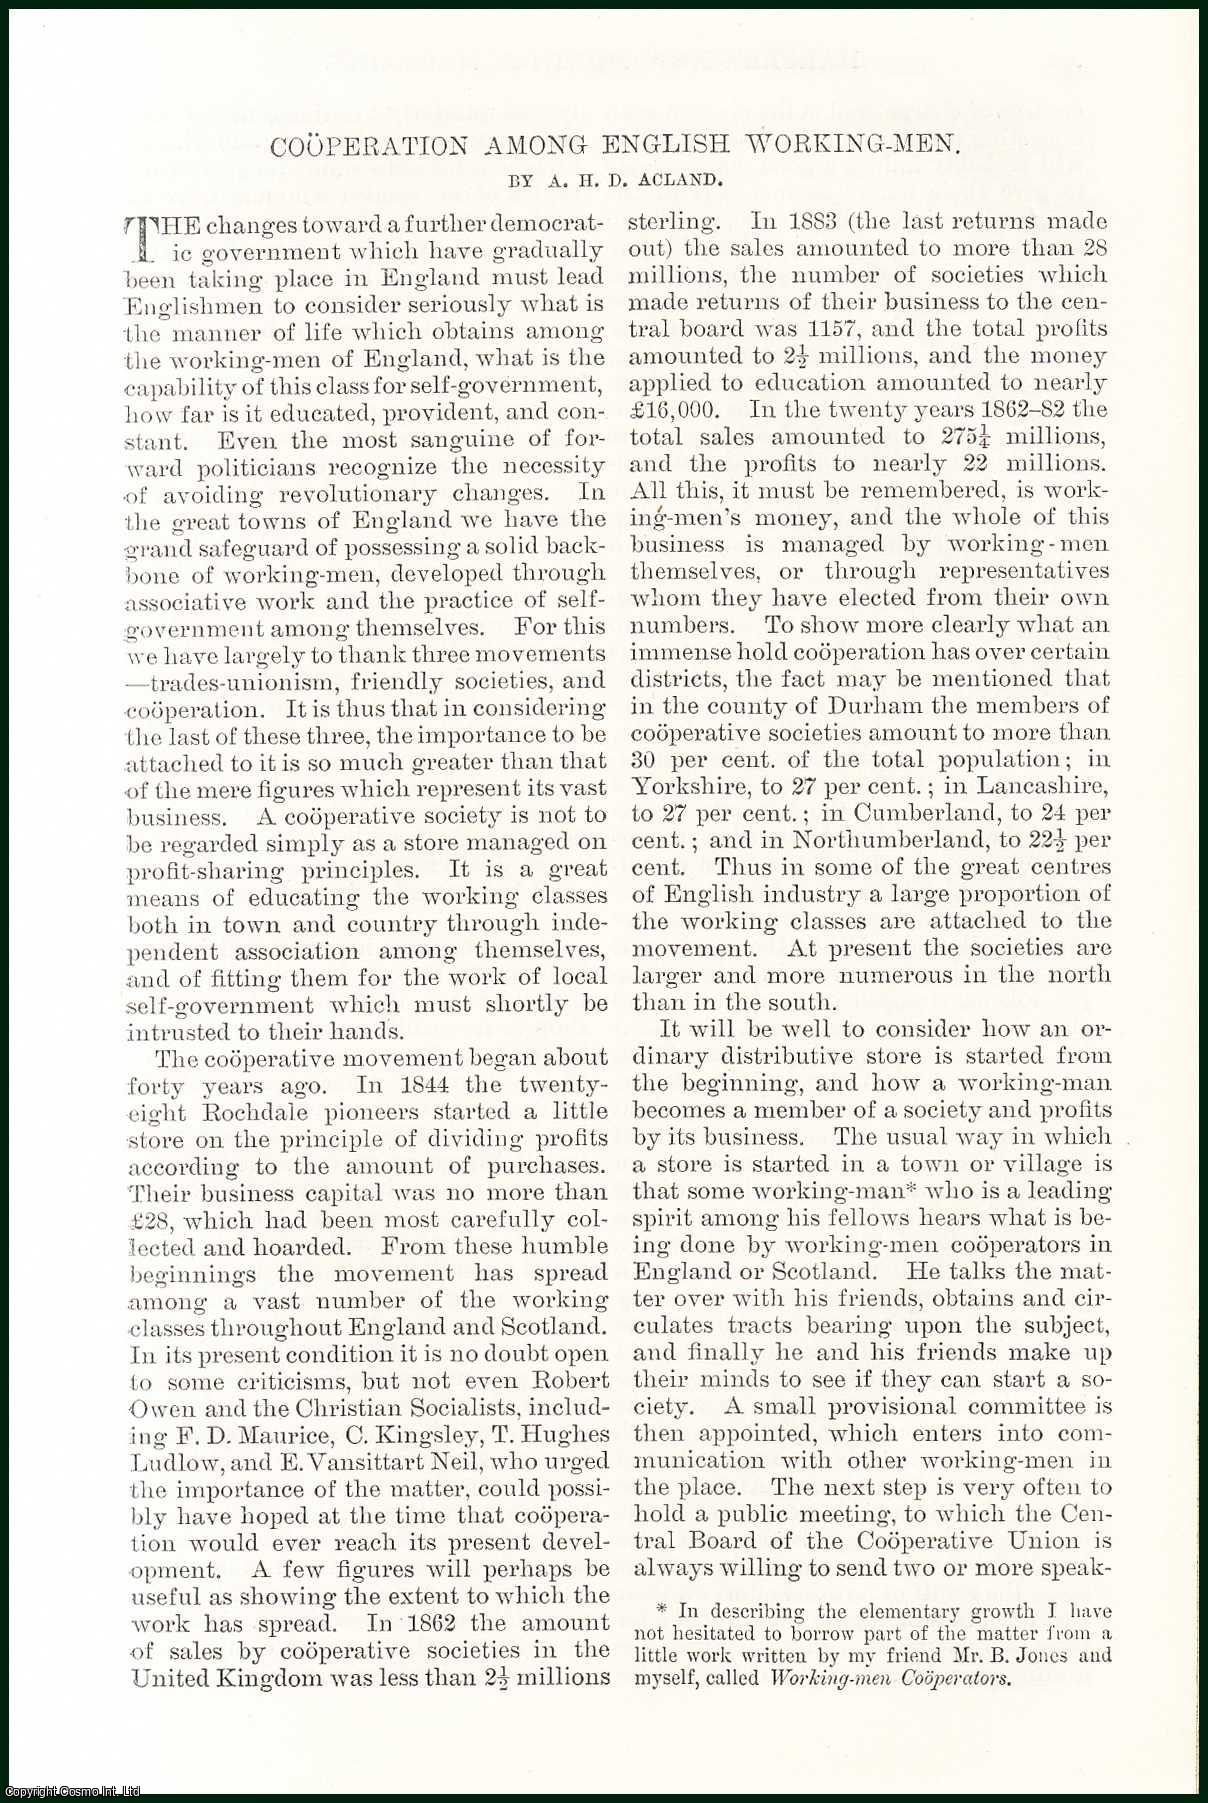 A.H.D. Acland - Cooperation Among English Working Men : What Is the manner of life which obtains among the Working-men of England, what is the capability of this class for self-government, how far is it educated, provident, & constant. An uncommon original article from the Harper's Monthly Magazine, 1886.